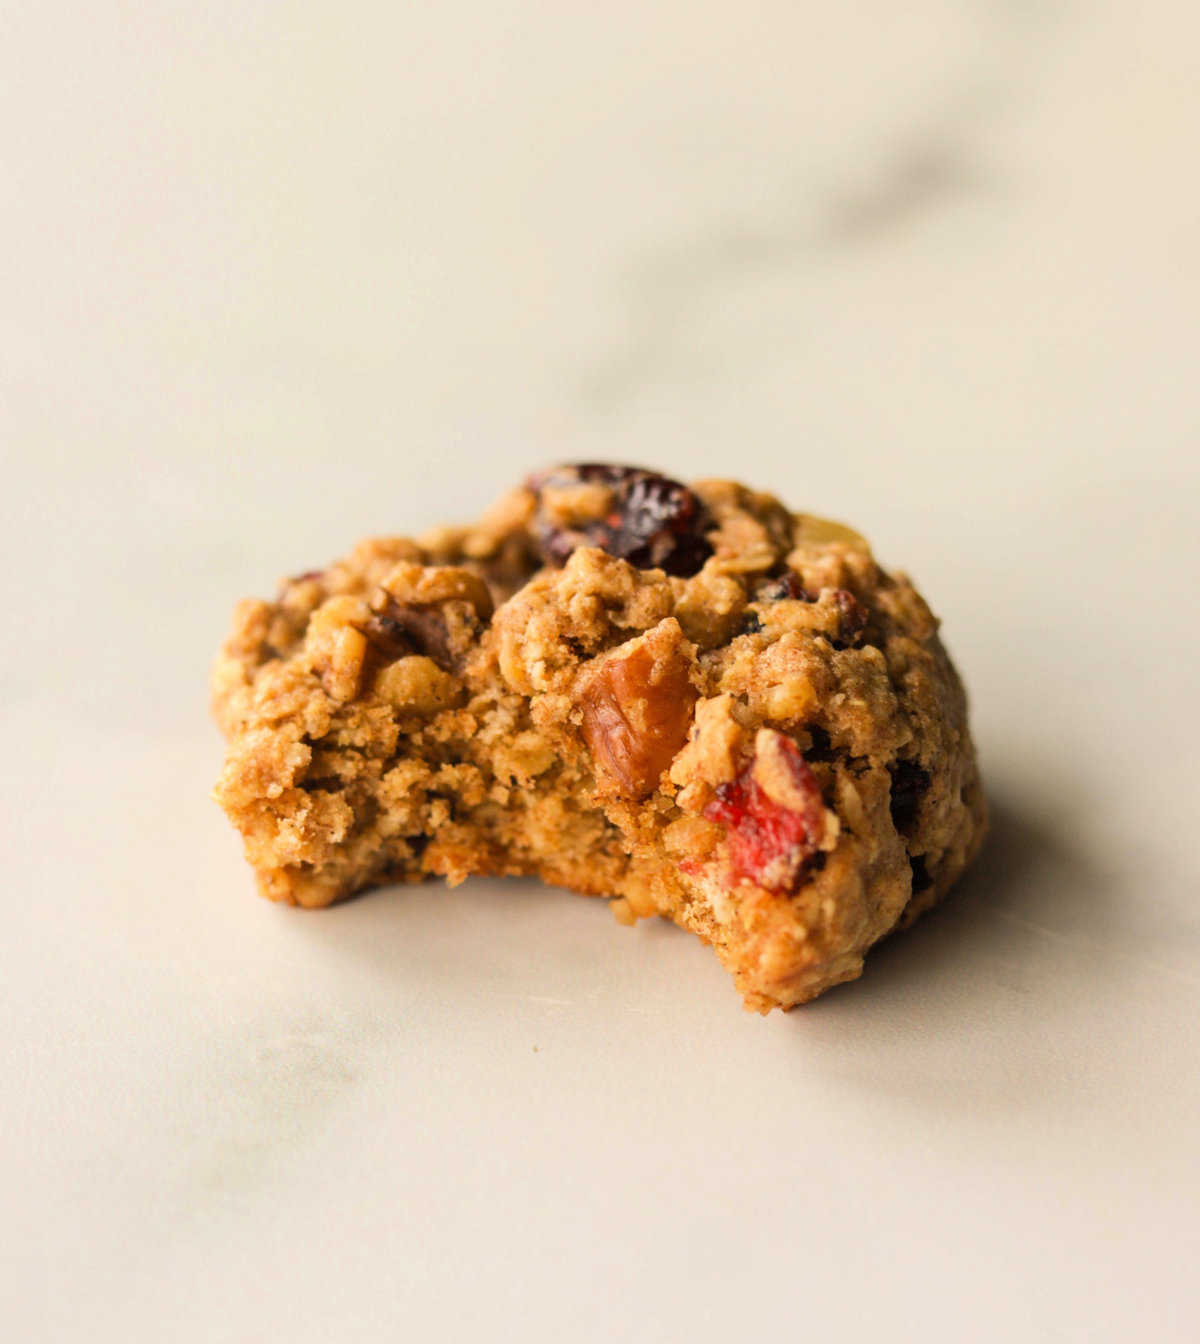 A side shot of an oatmeal cranberry cookie with a bite taken out of it.